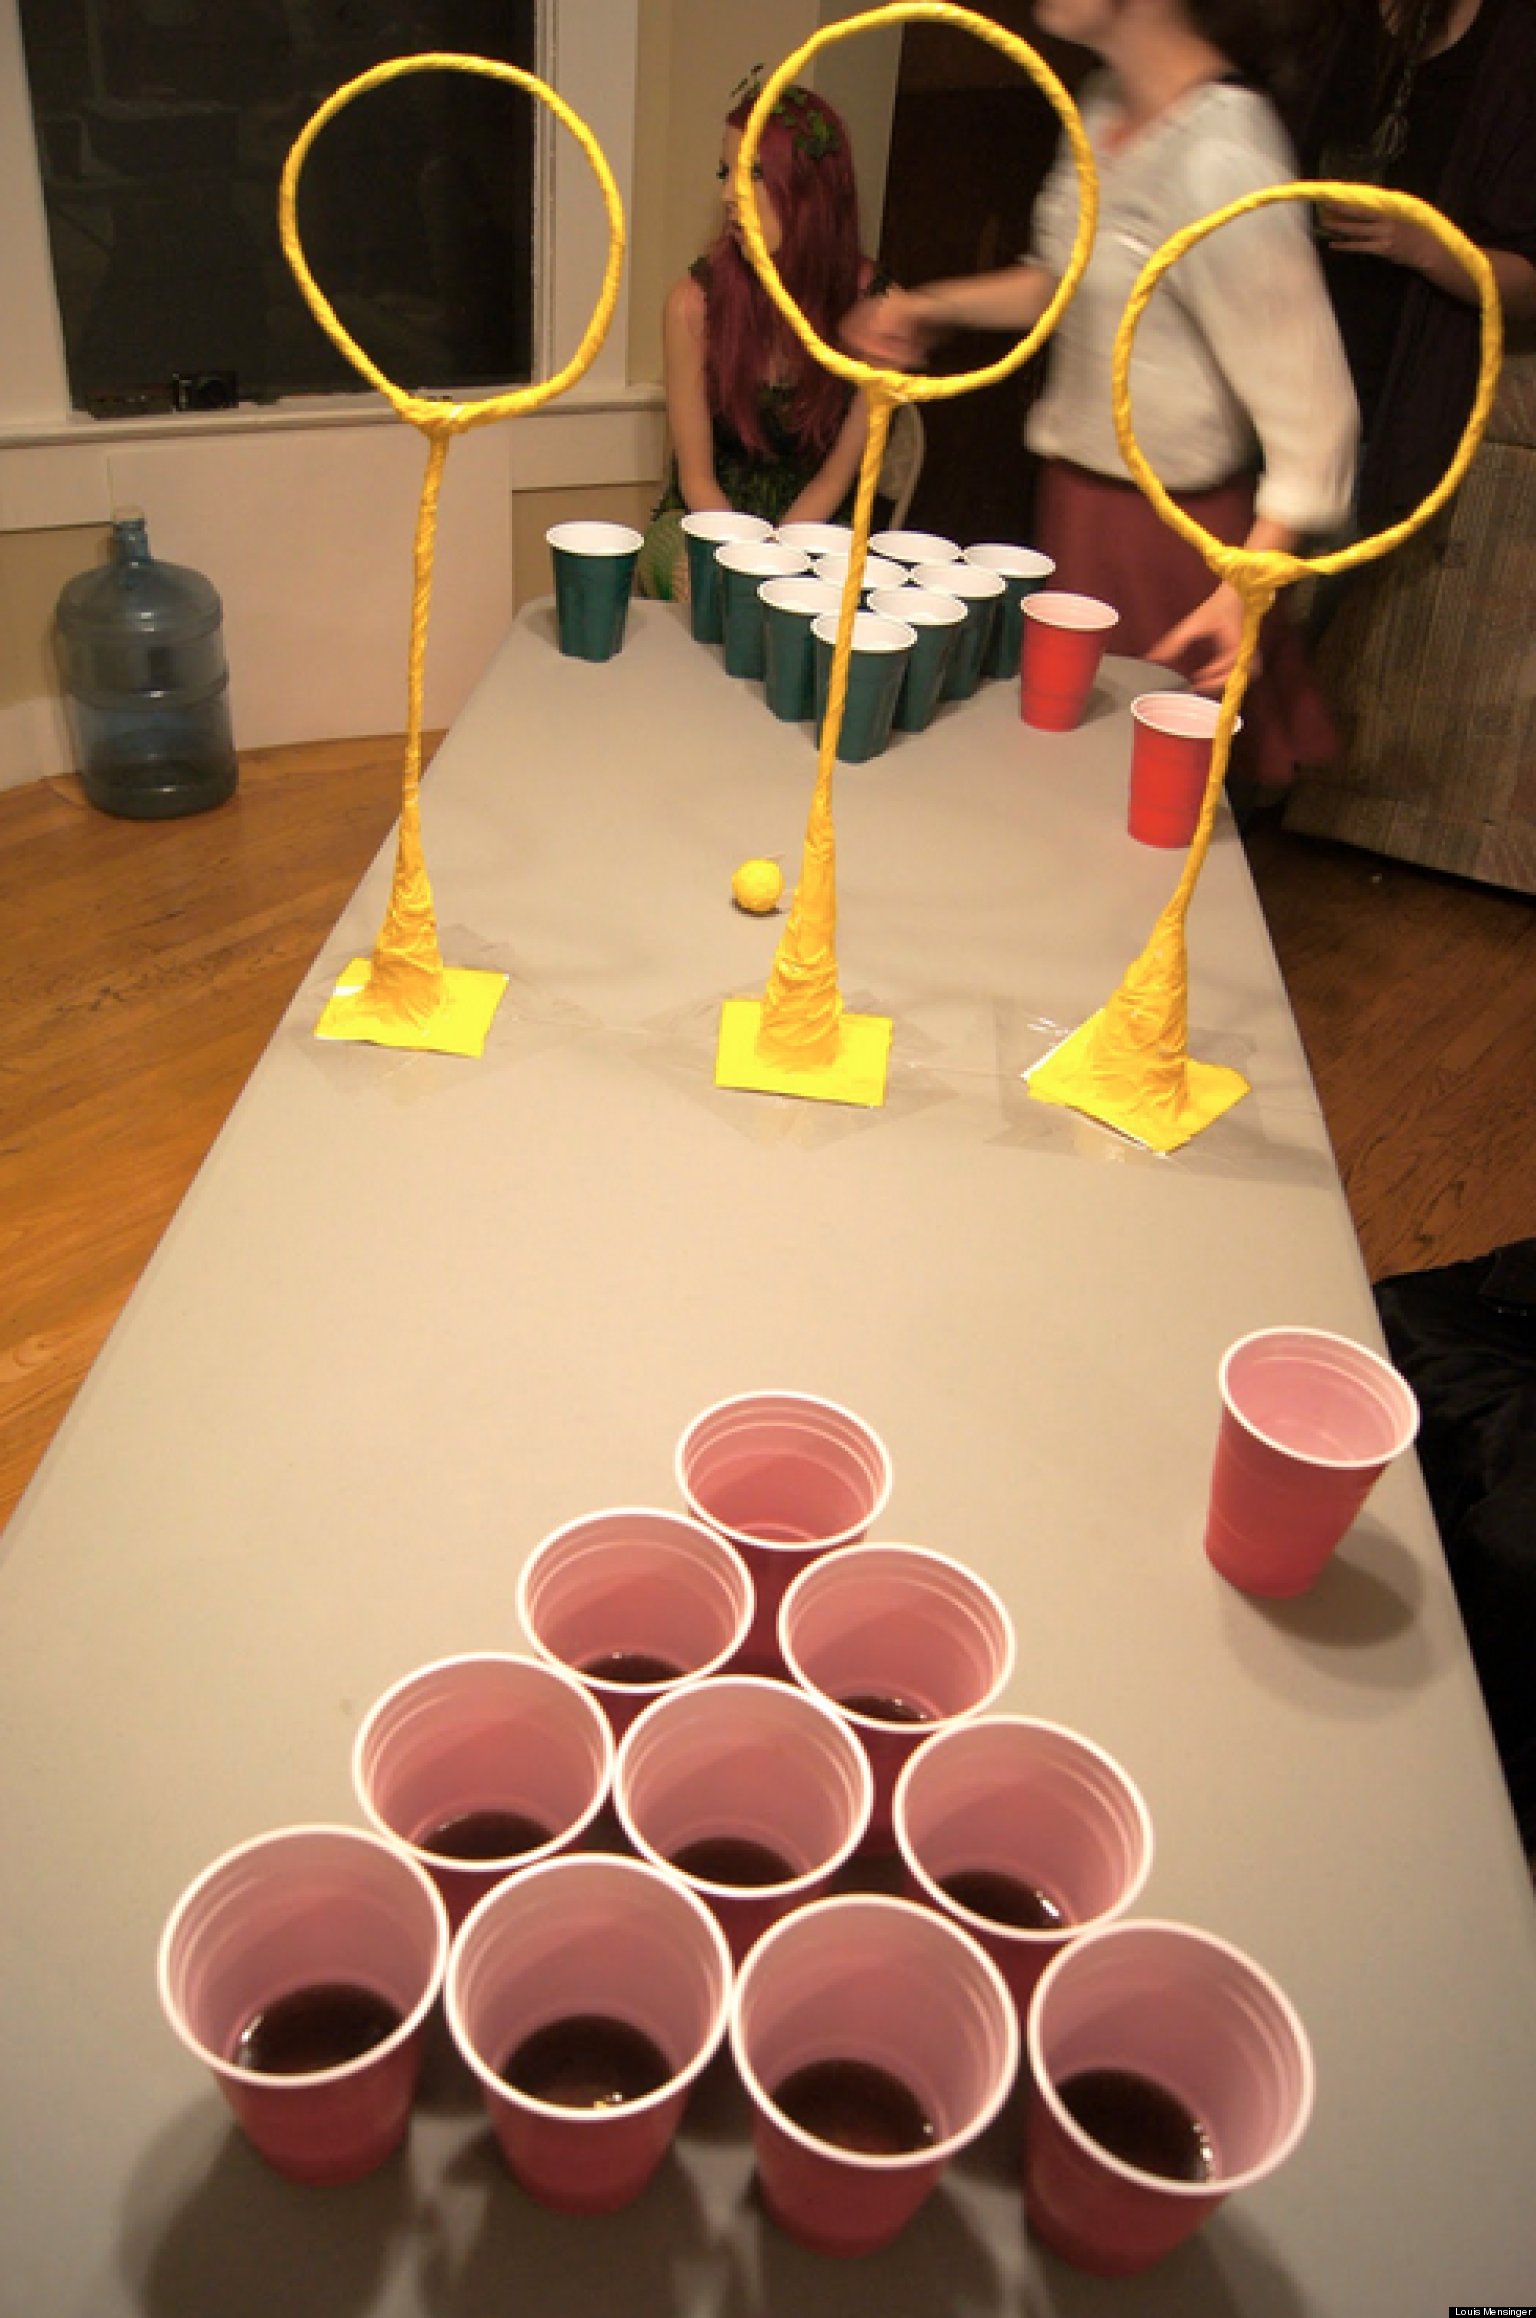 Quidditch Pong: College Student Louis Mensinger Invents Drinking Game